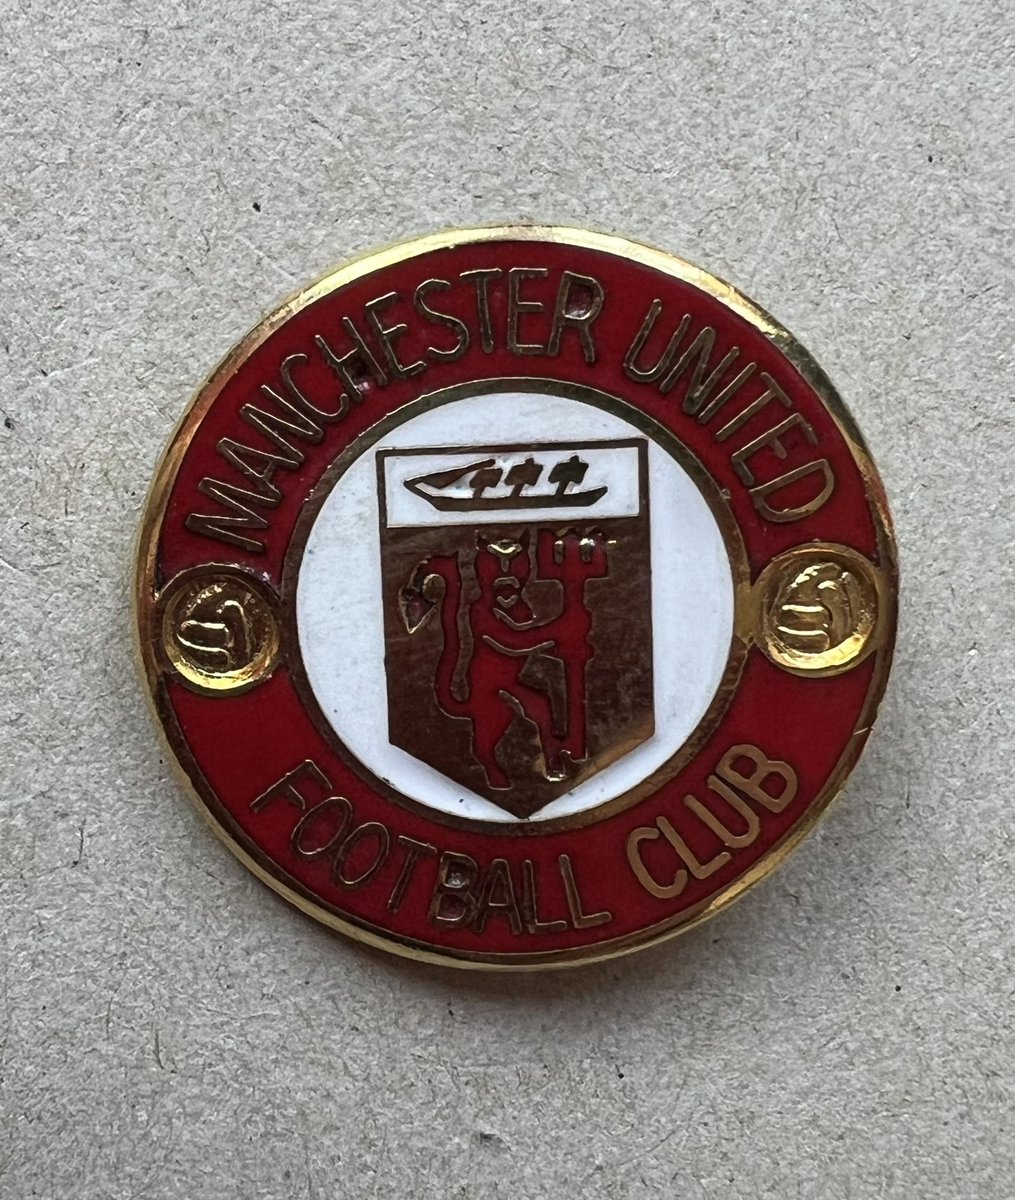 Today’s badge of the day. A classic from the late 80’s from Reeves. #MUFC #UTFR #GGMU #ManchesterUnited